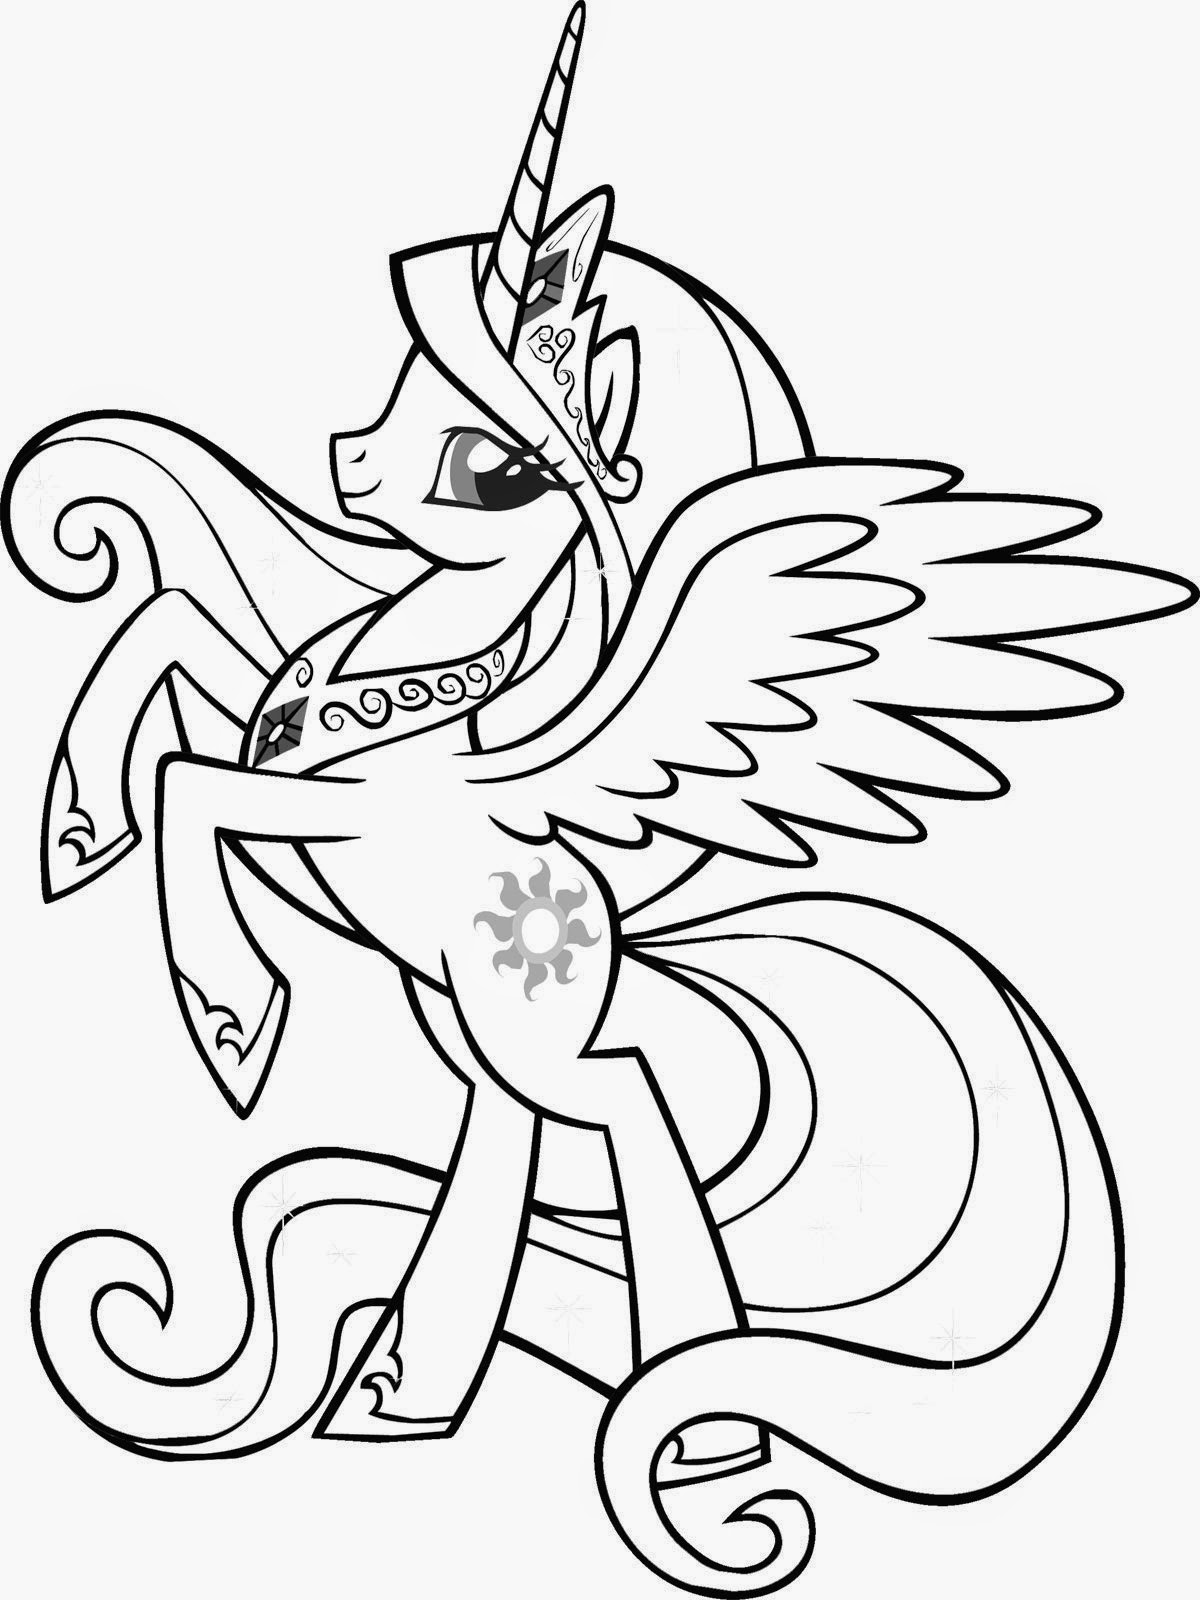 Download Coloring Pages: My Little Pony Coloring Pages Free and ...